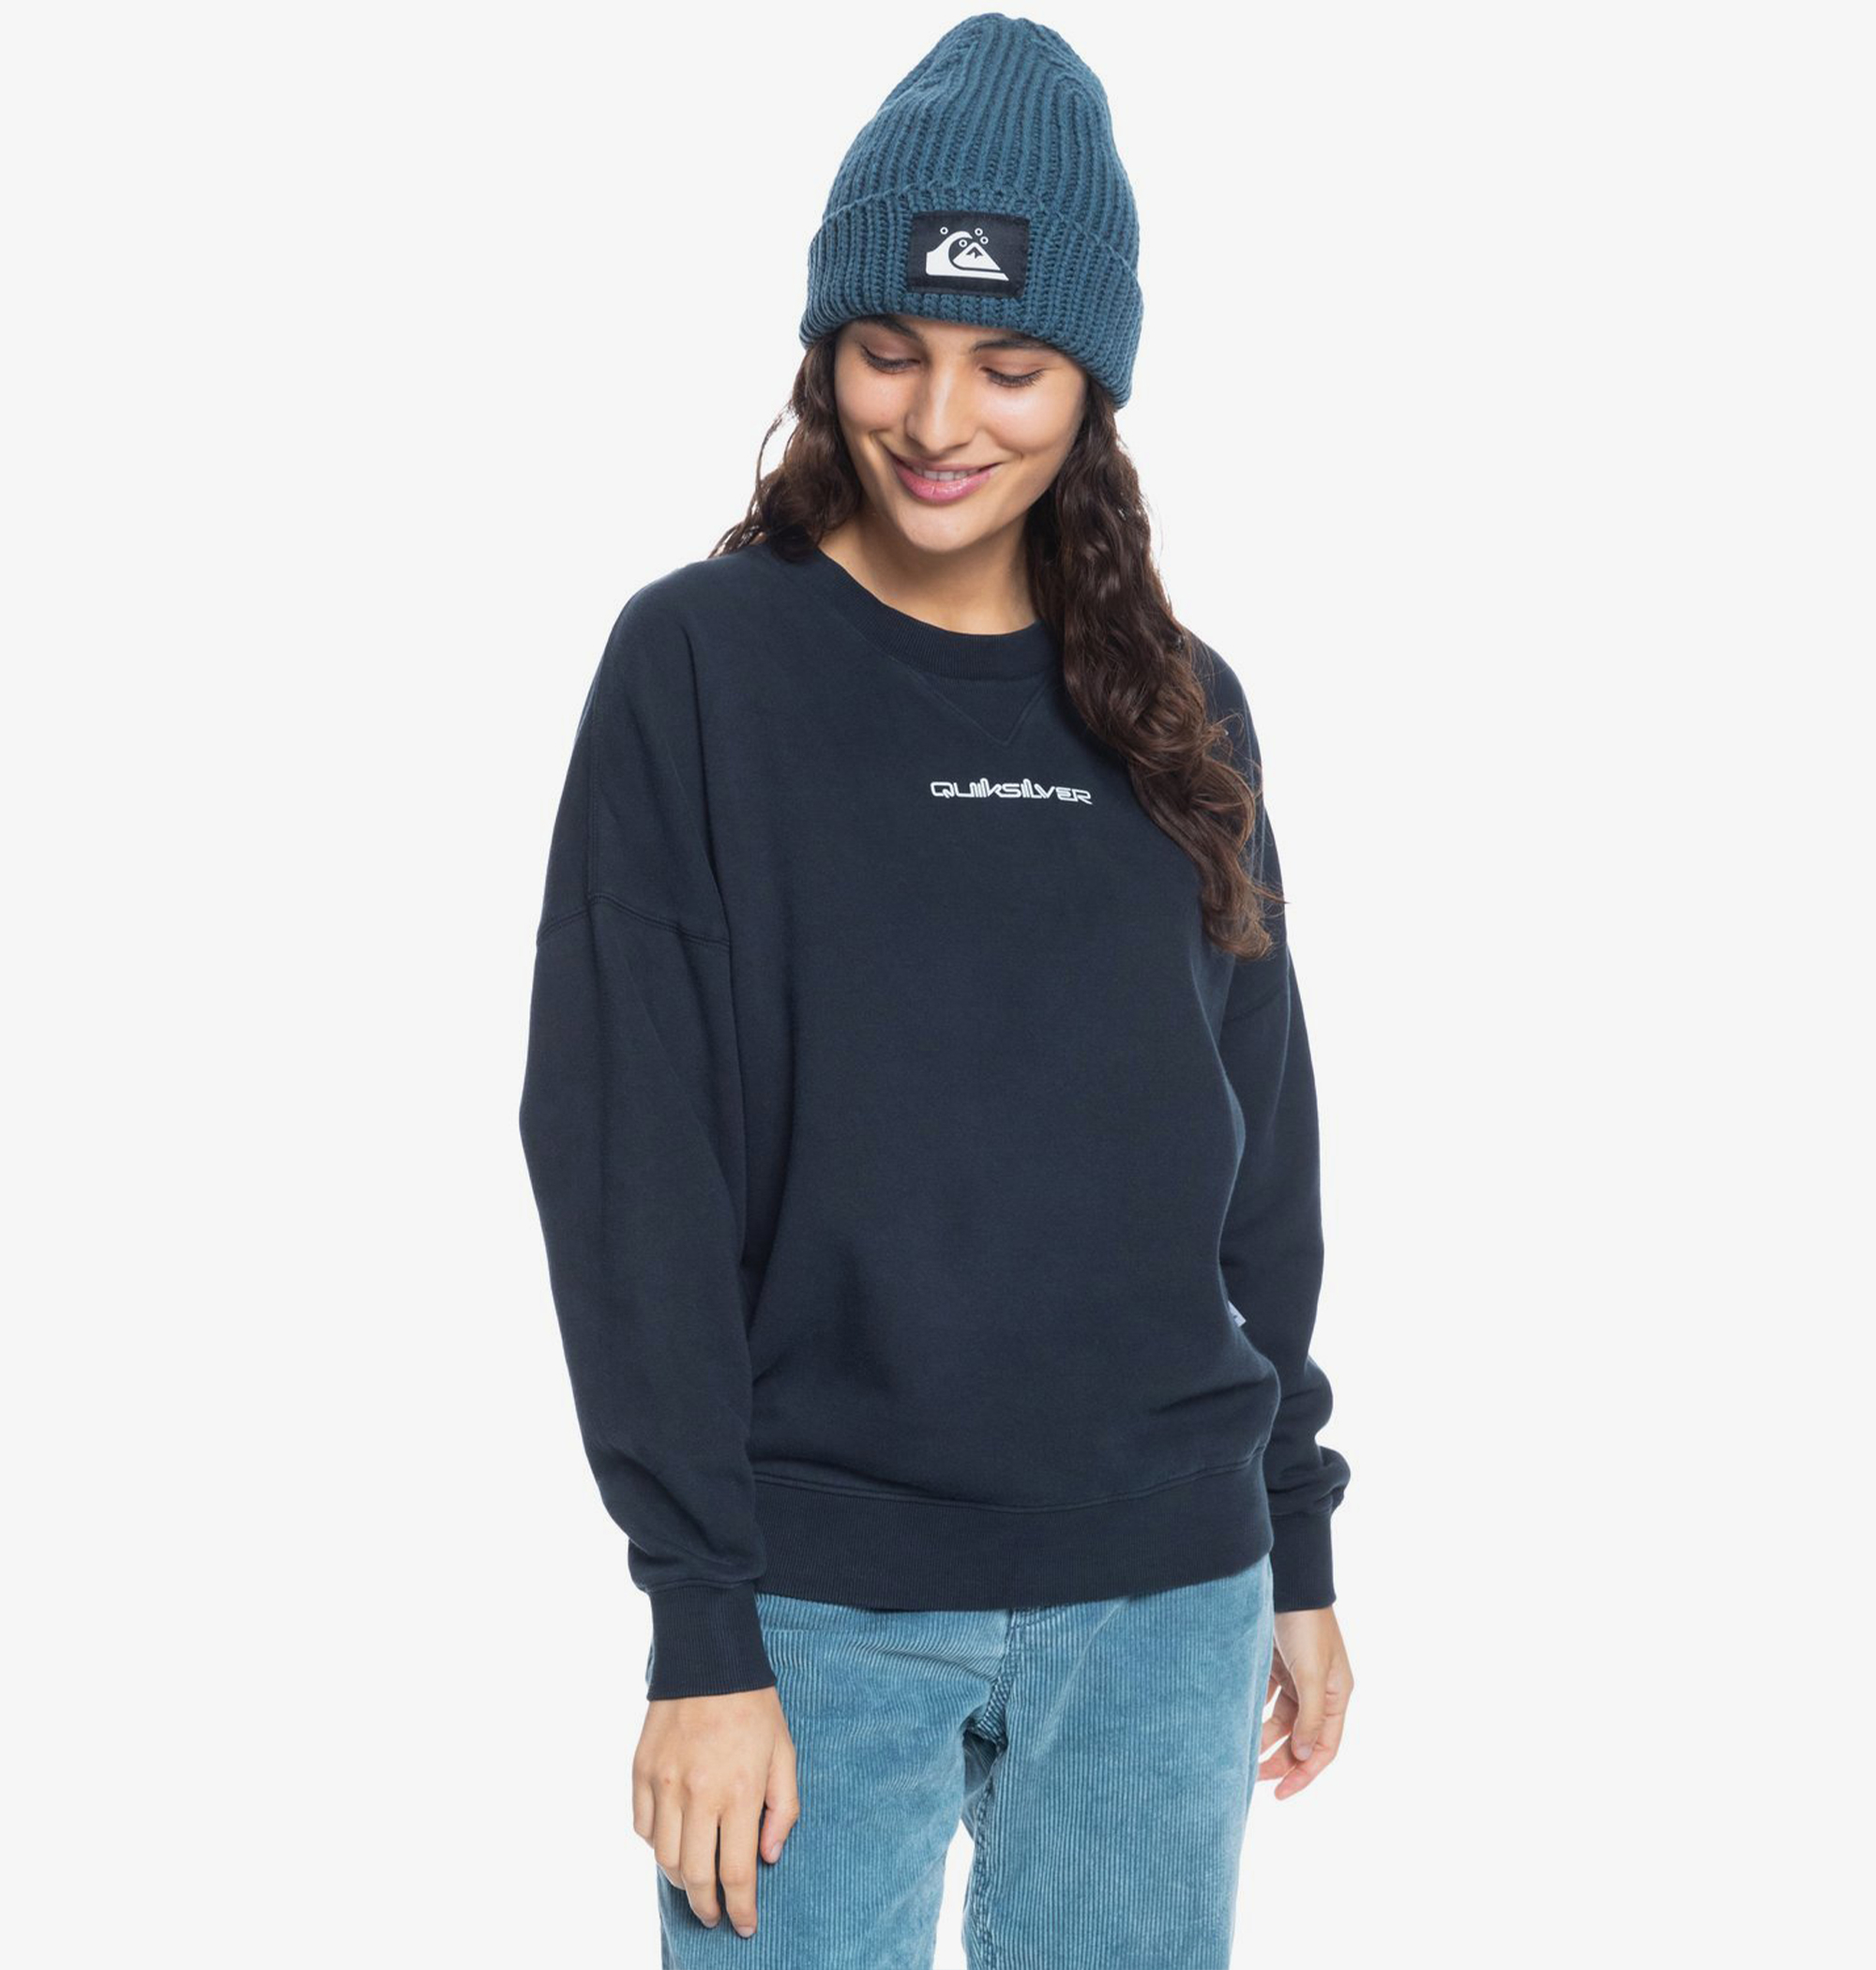 35%OFF！＜Quiksilver＞ STM OVERSIZED CREW 滑らかで優しい肌触りの素材が魅力的なスウェット